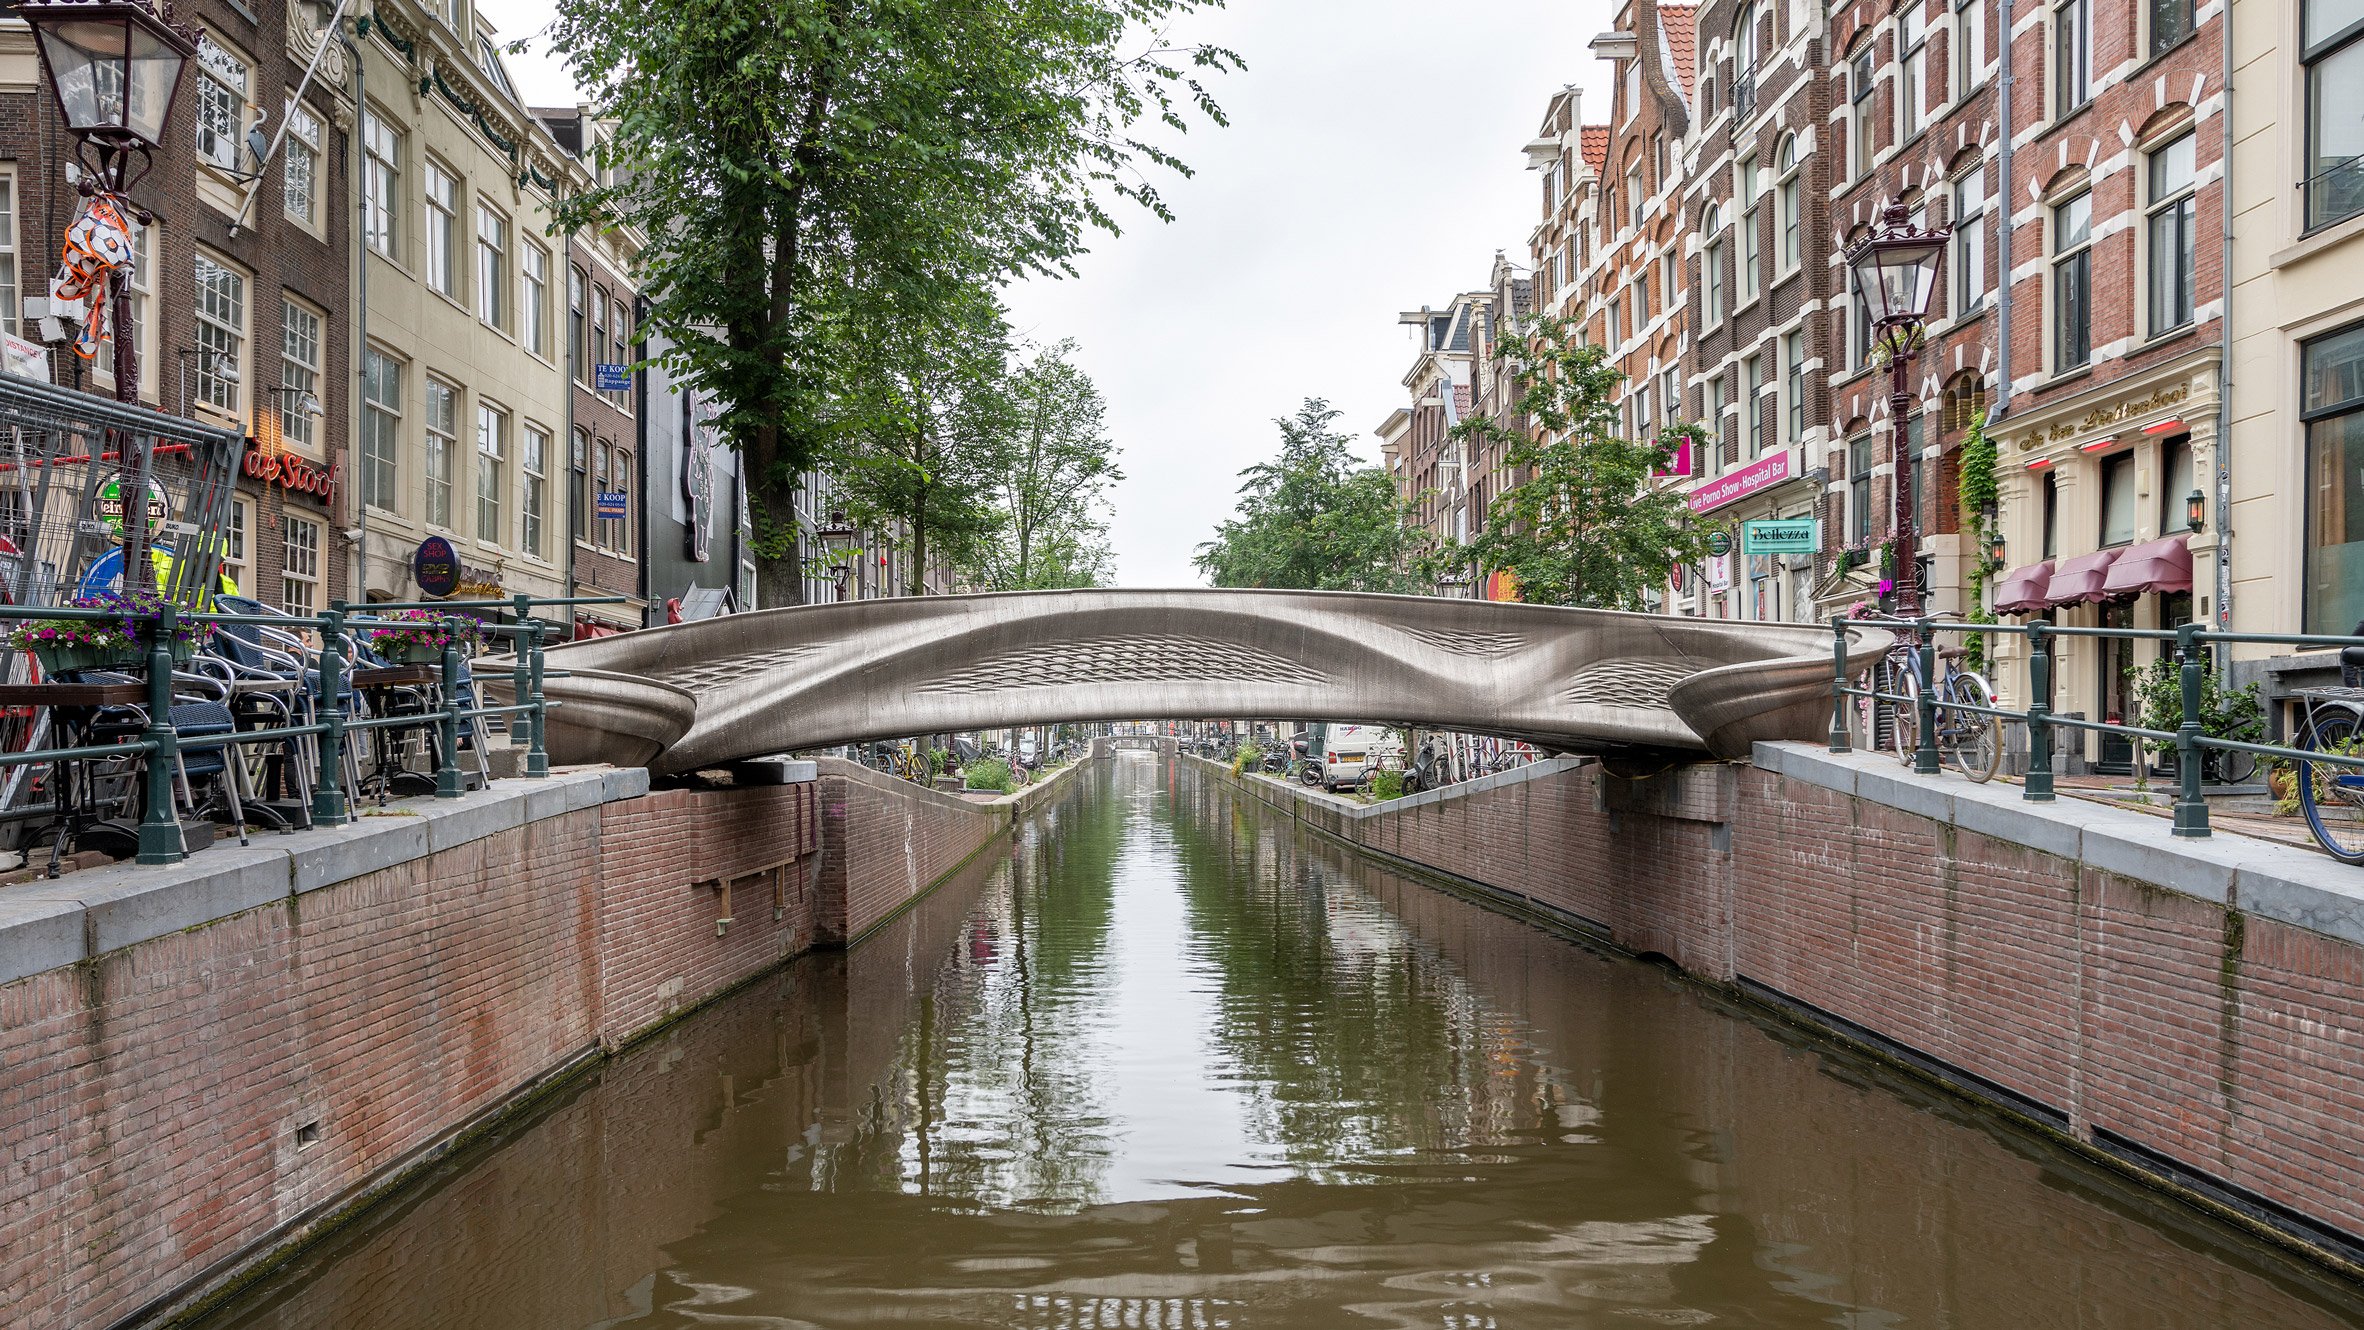 Long-awaited 3D-printed stainless steel opens in Amsterdam